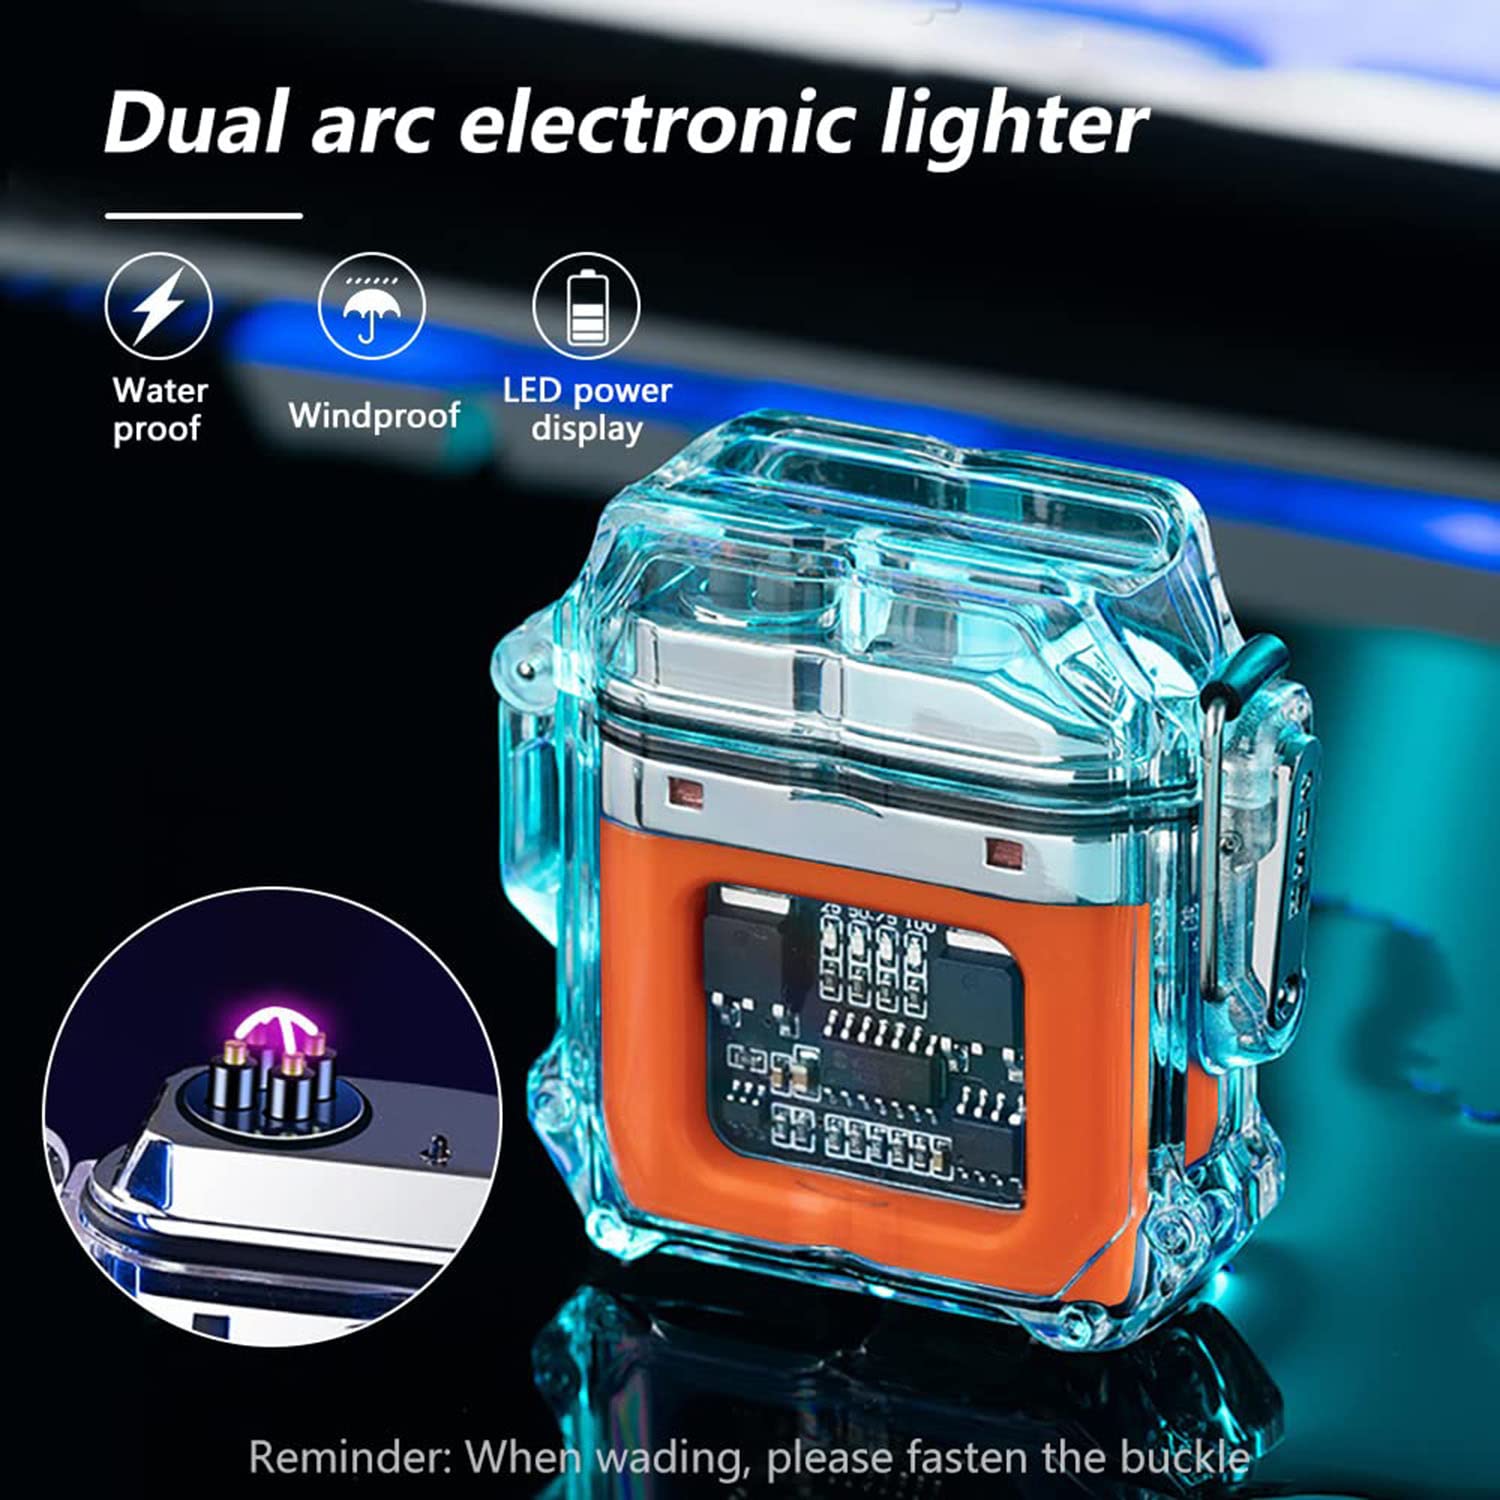 Flameless Electric Lighter Waterproof & Windproof Electric Arc Lighter Plasma Lighter USB Rechargeable Lighter Clear Double Arc Lighter with Power Display Suitable for Travel, Camping (Orange)